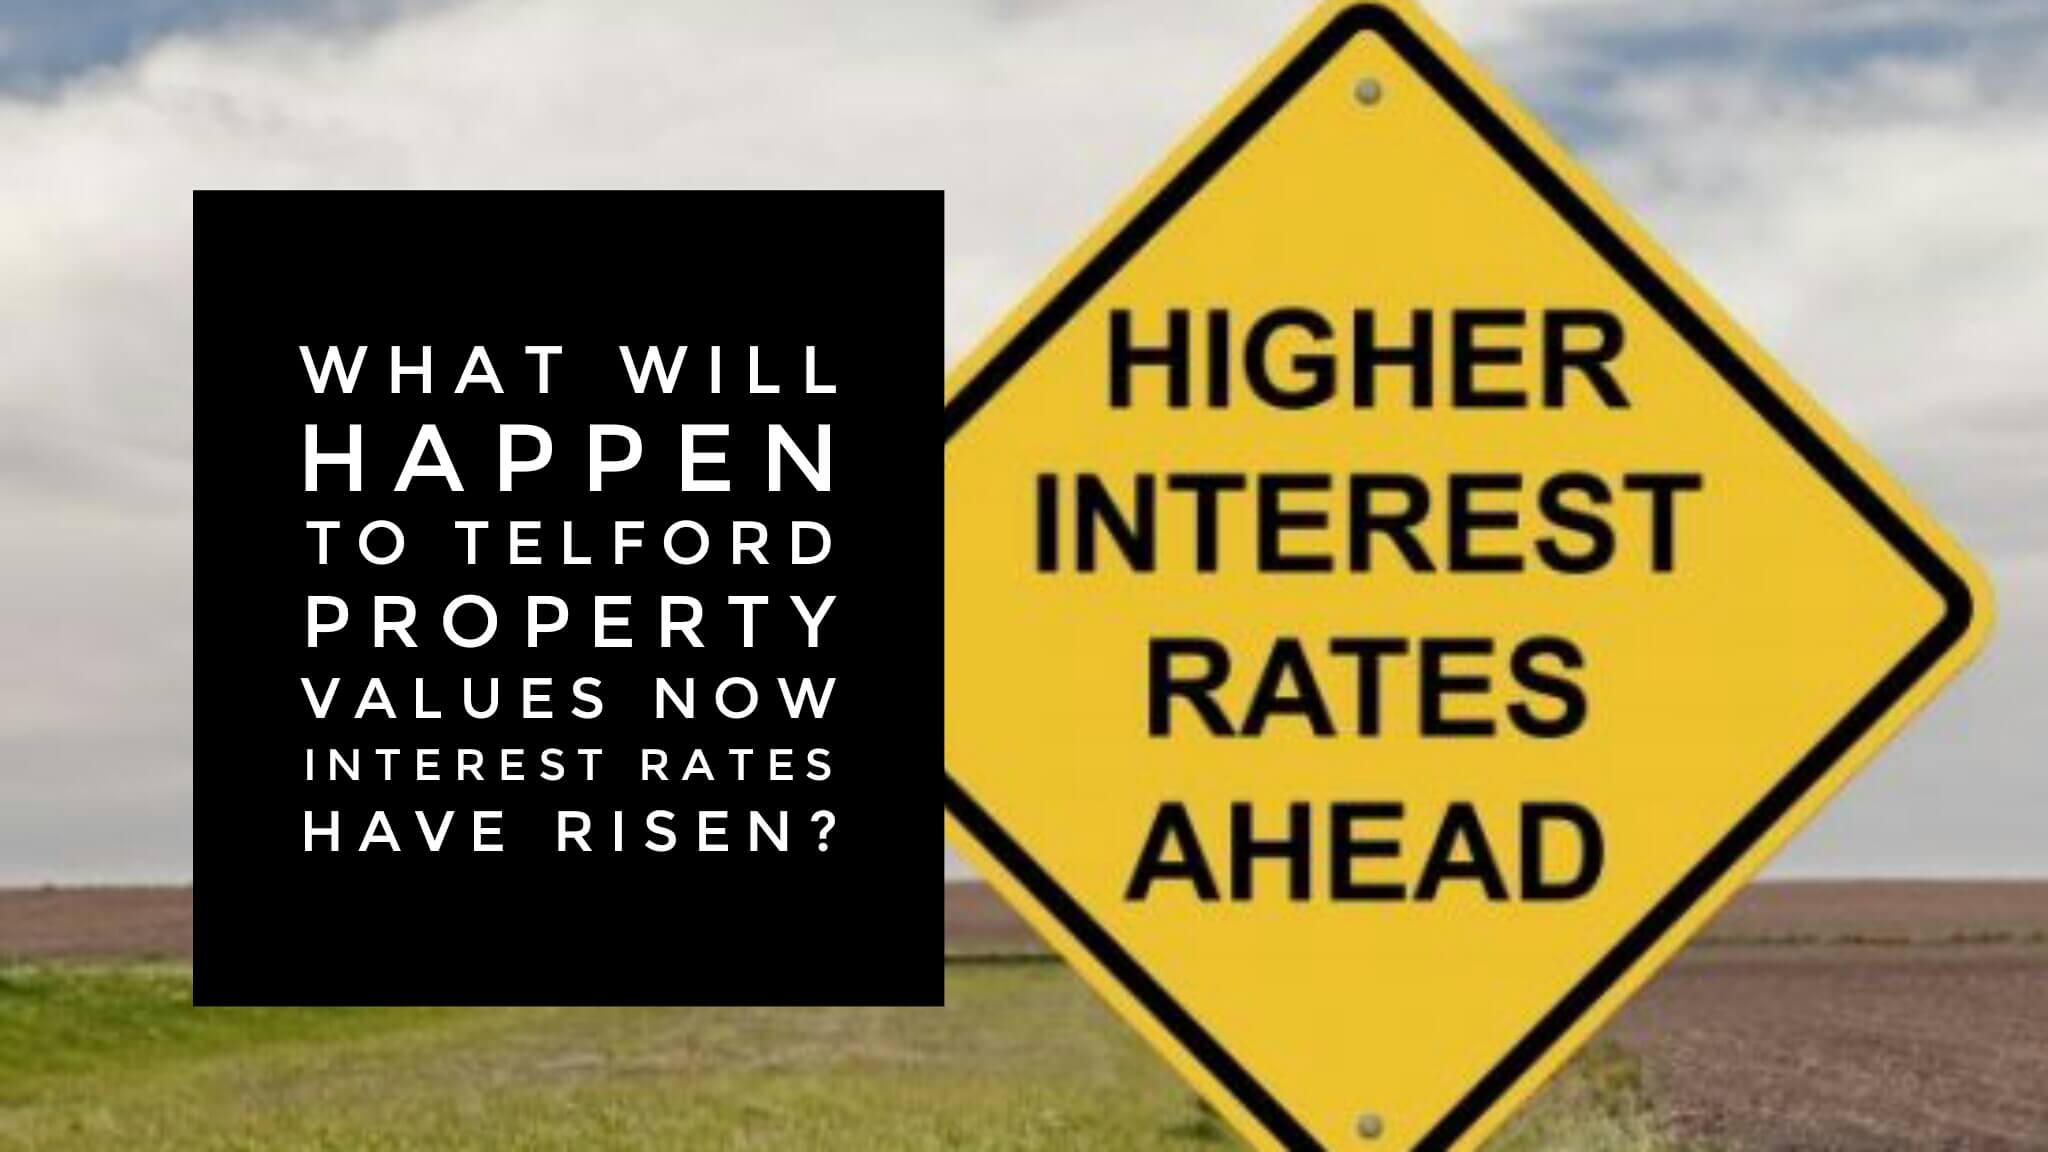 What Will Happen to Telford Property Values now Interest Rates have Risen?